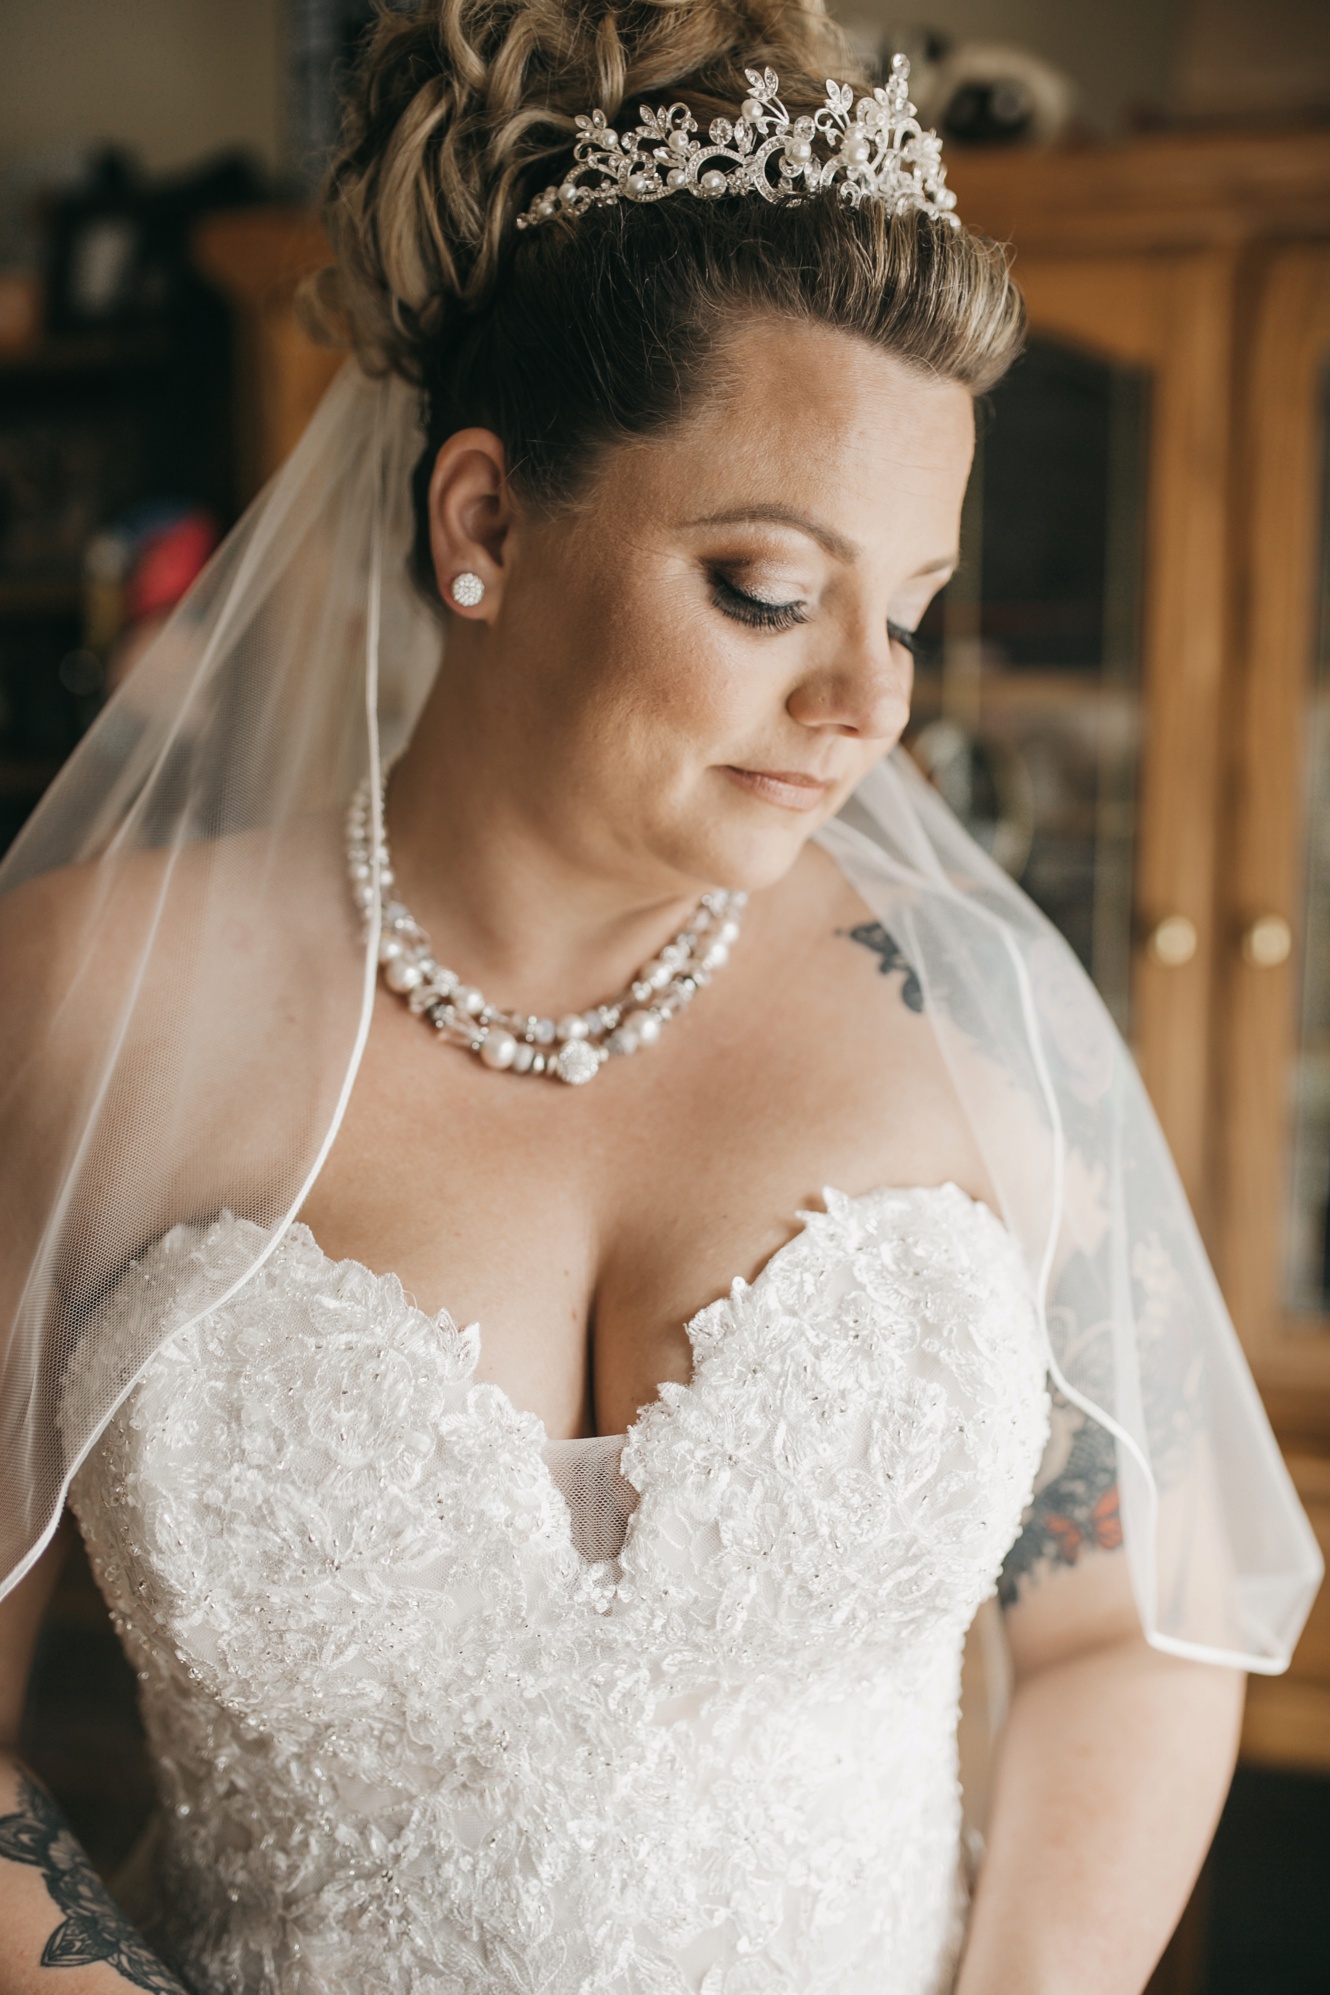 Tips for bridal portraits photo